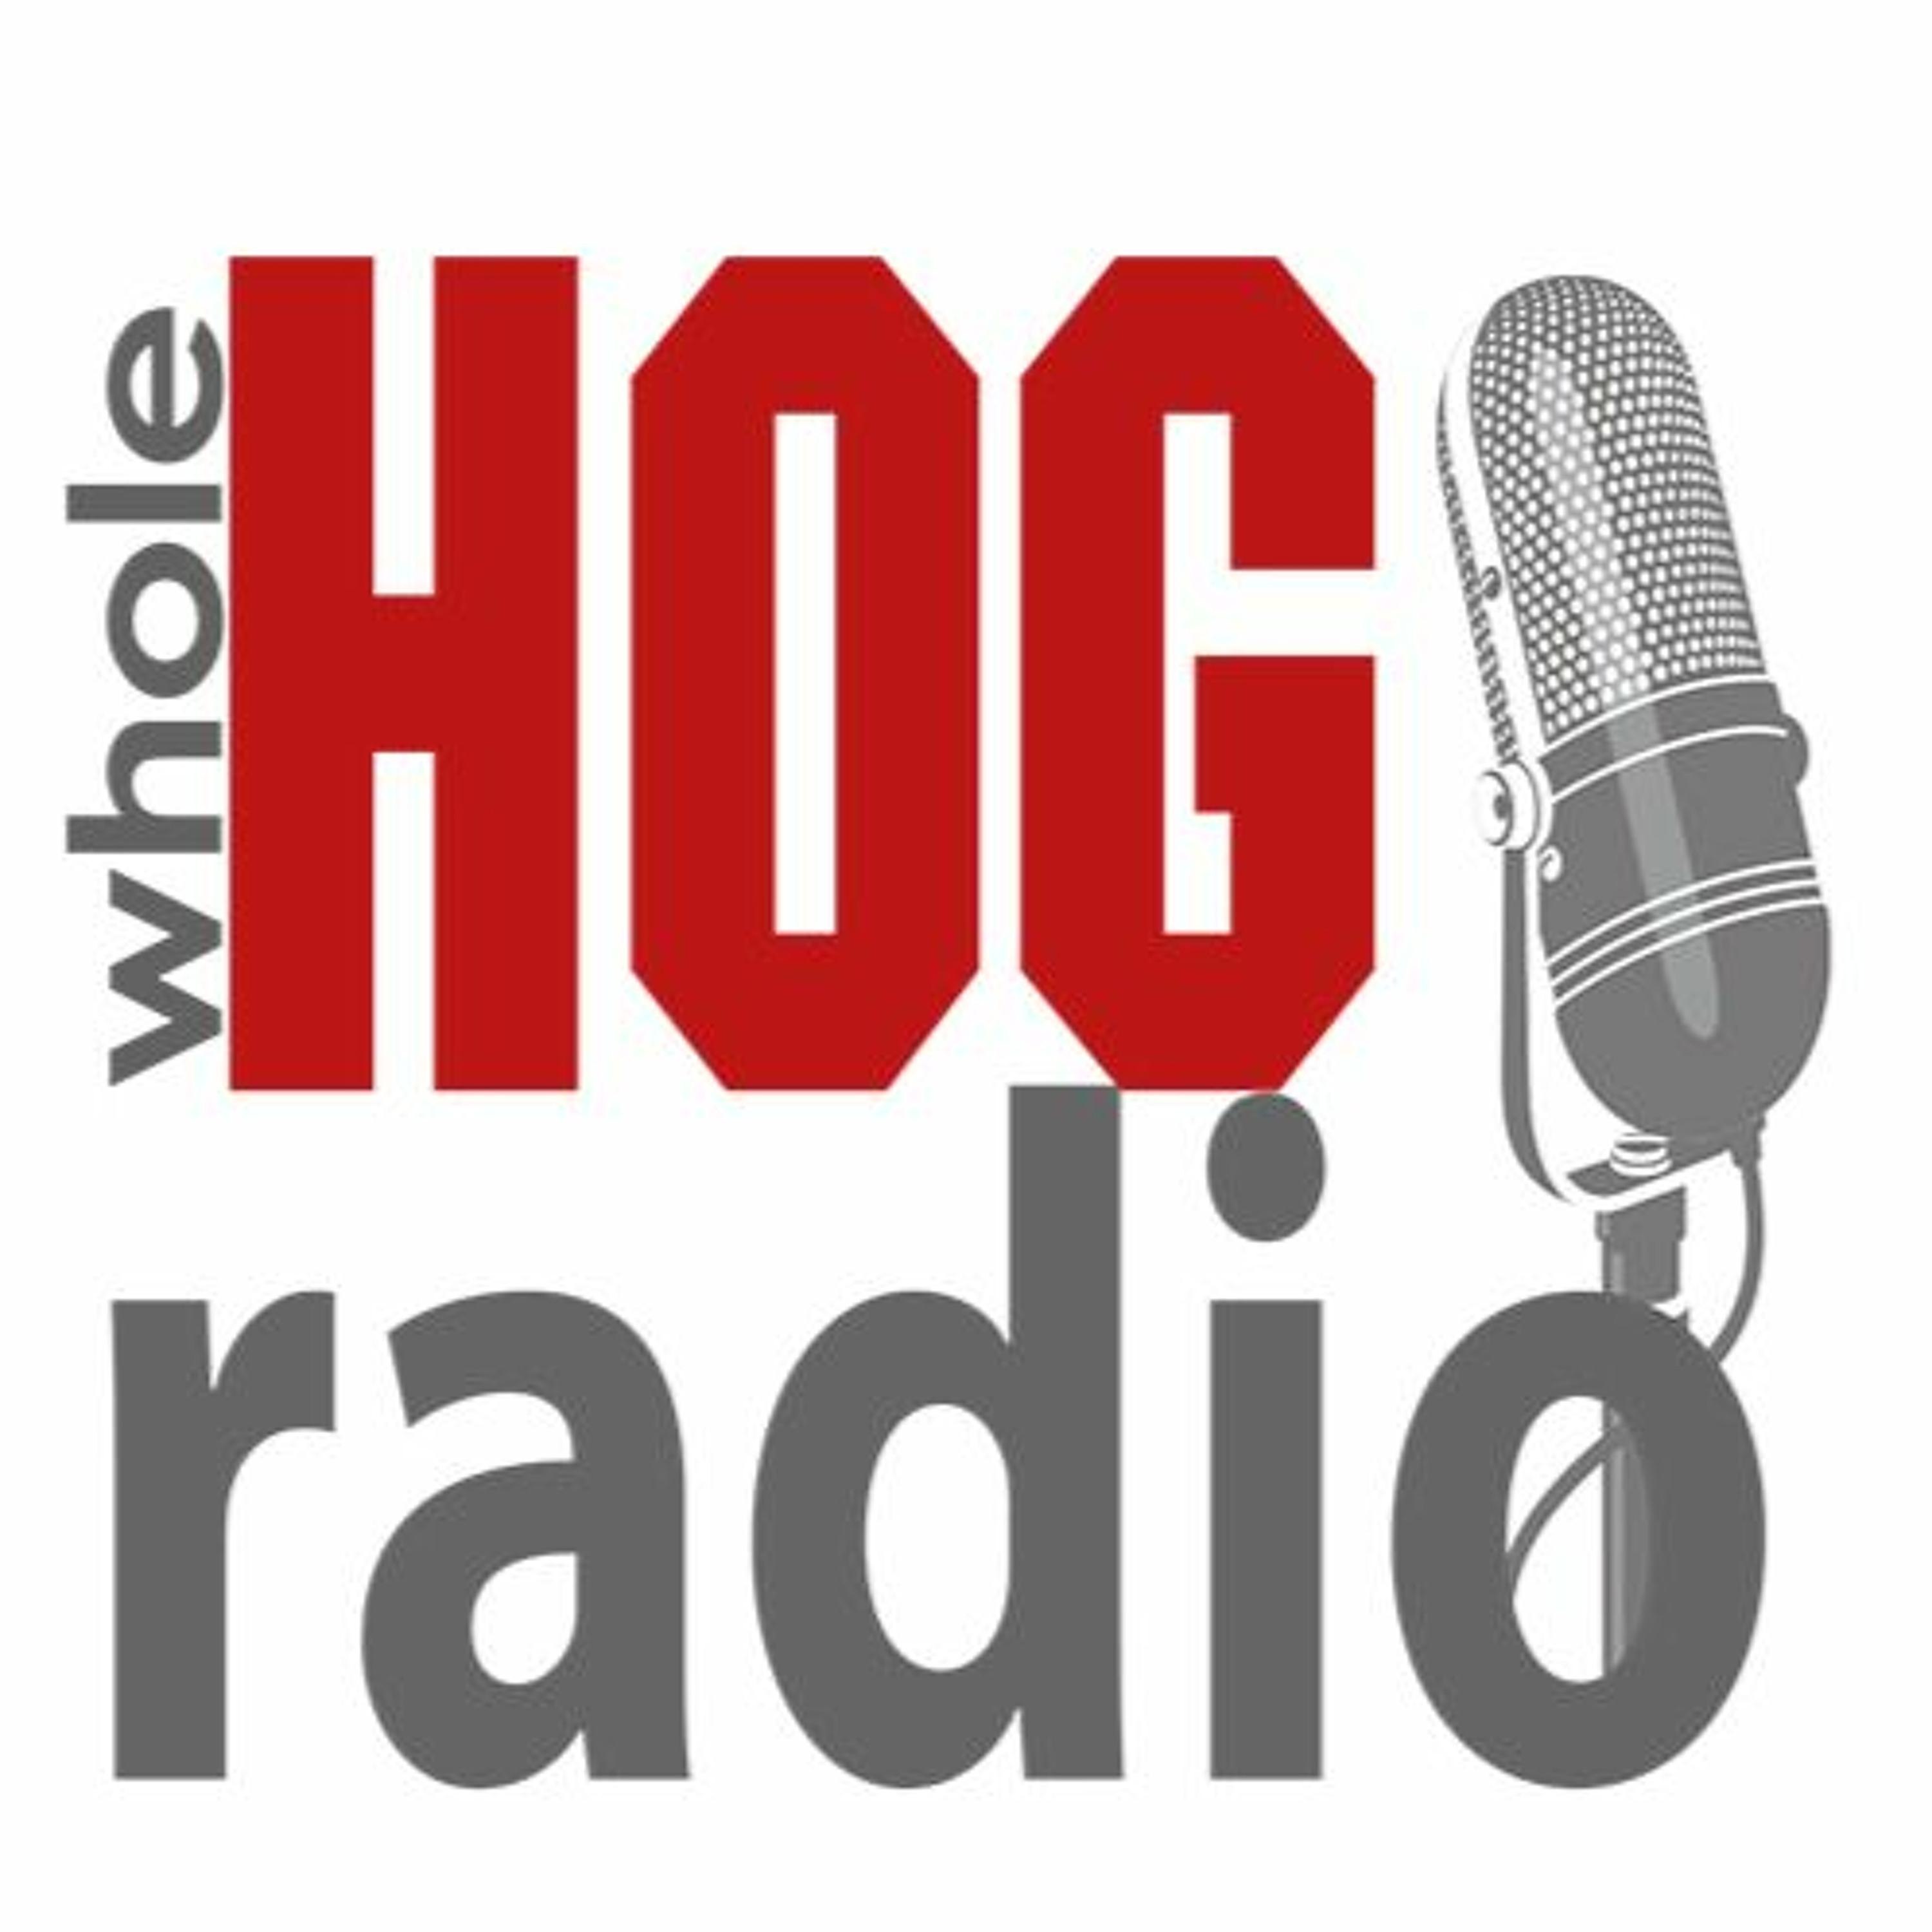 WholeHog Podcast: Basketball roster notables, Hays Myers